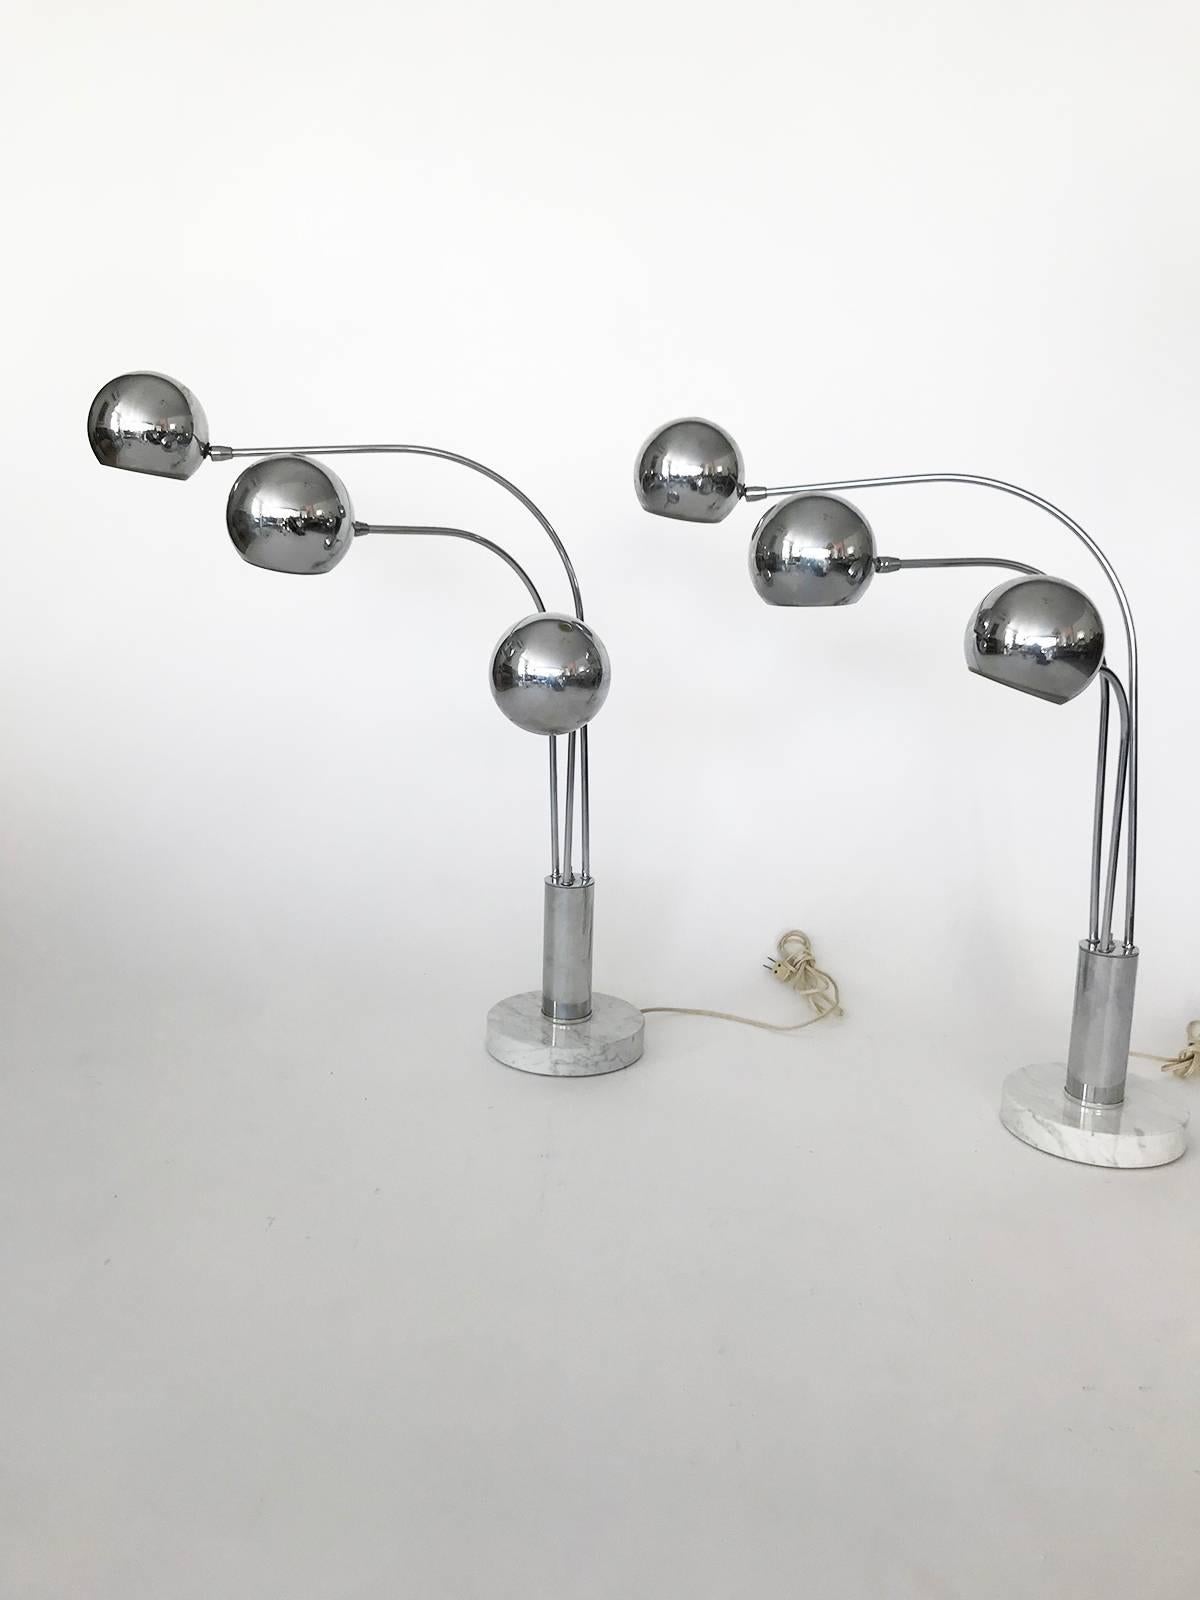 Amazing pair of midcentury chrome orb three-armed lamp with thick heavy white marble base. Sold separately. Listing is for one-lamp, select two if you want the pair. The arms pivot and the orb heads rotate. Has three settings to turn on different